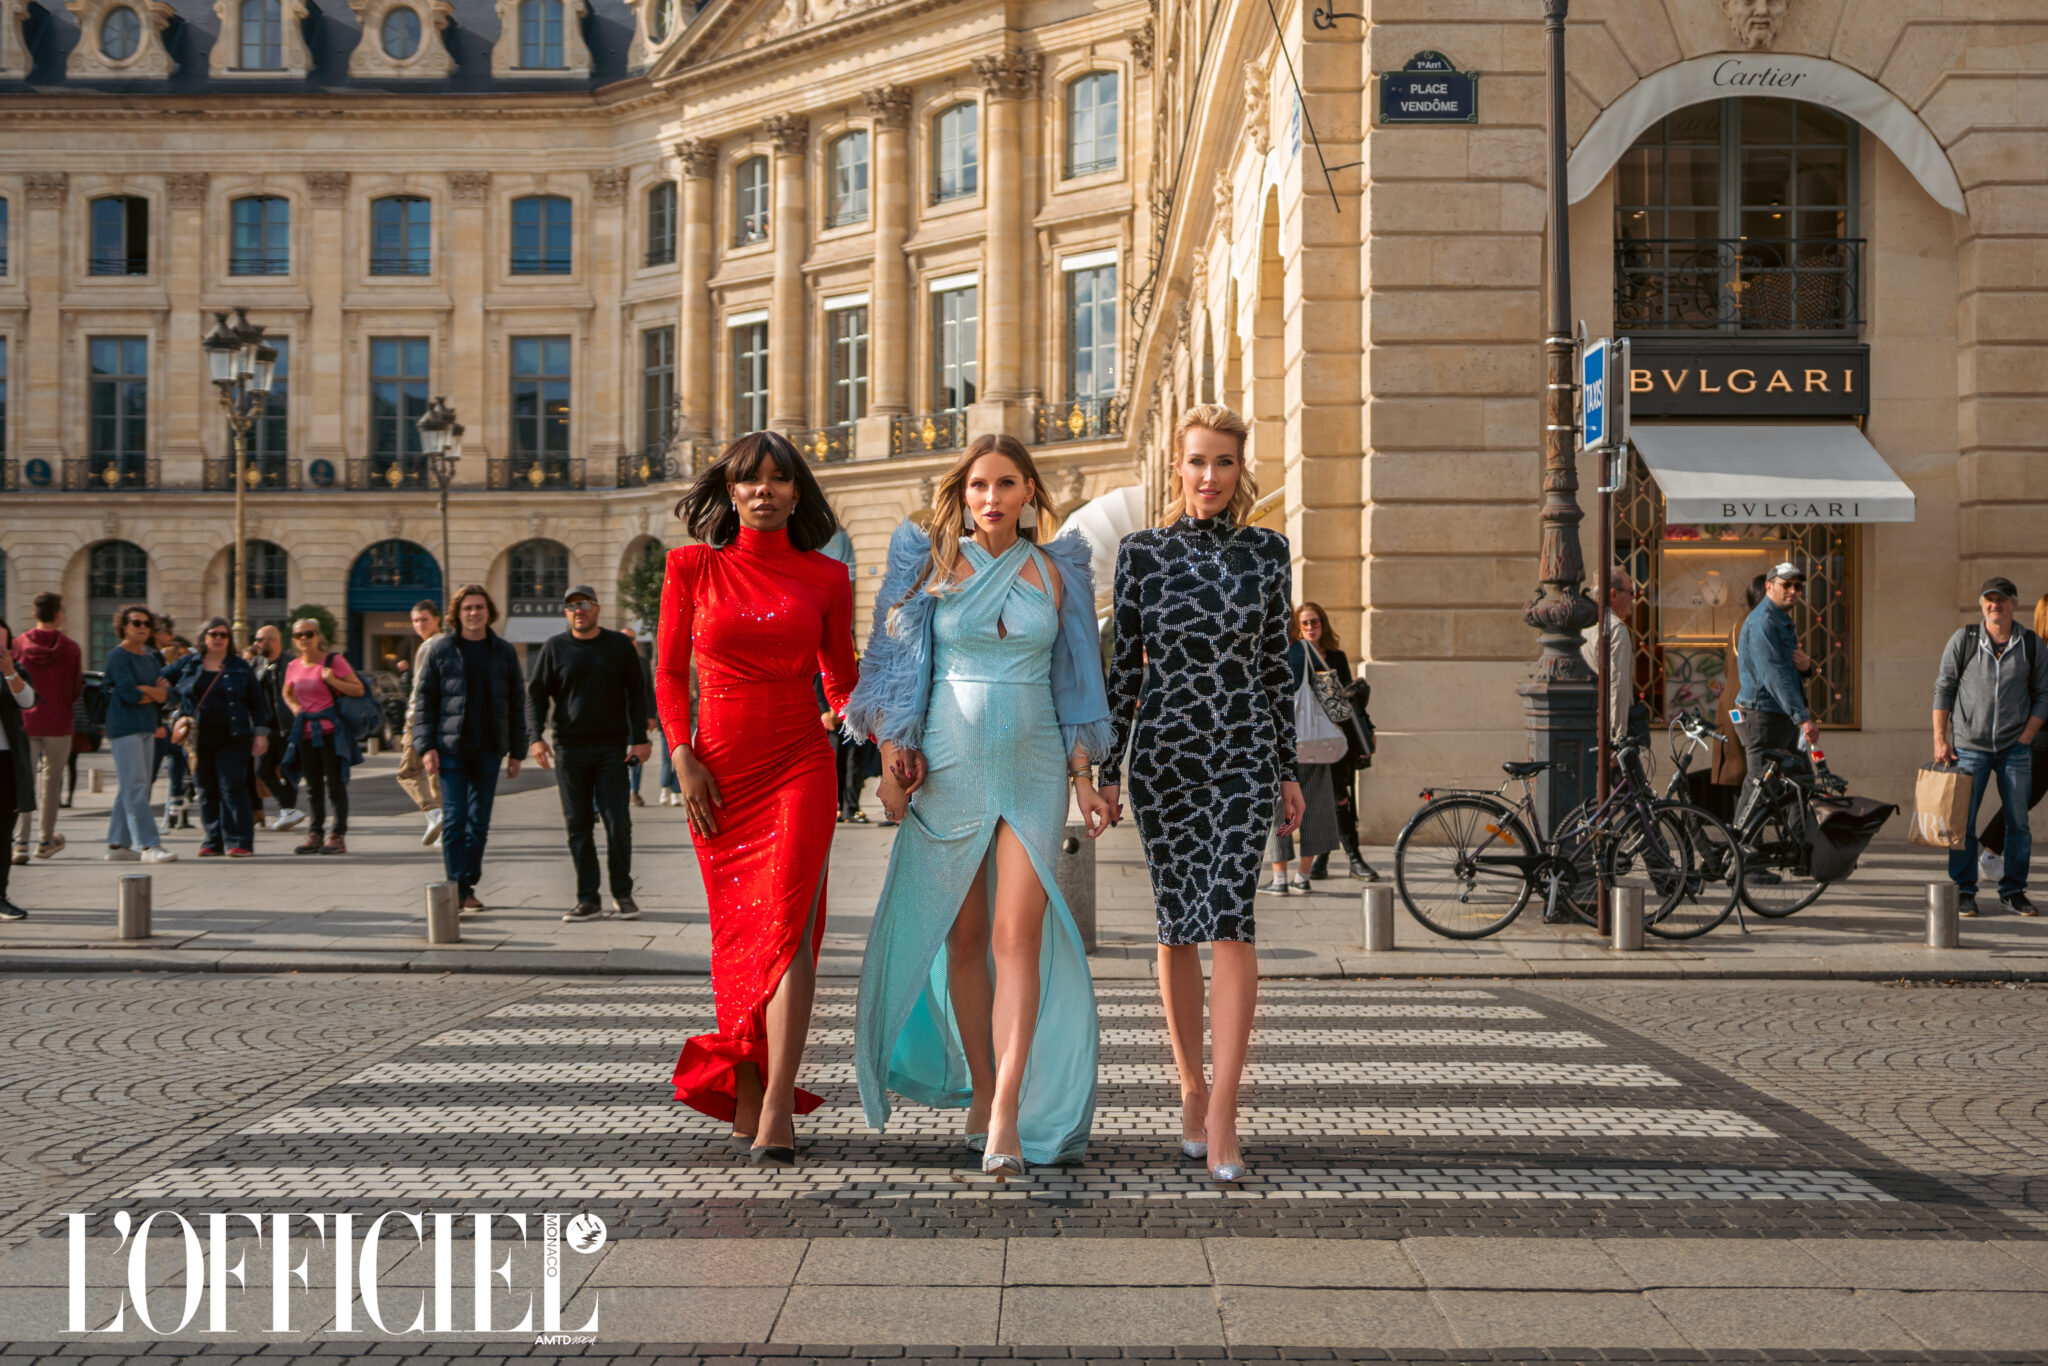 Feature at L'Officiel Monaco during Paris Fashion Week SS 23. Visual Fashion Story from the magical Paris. Featuring: Nicolas Besson, Gemy Maalouf, Charriol, Sol Angelann and more. 7